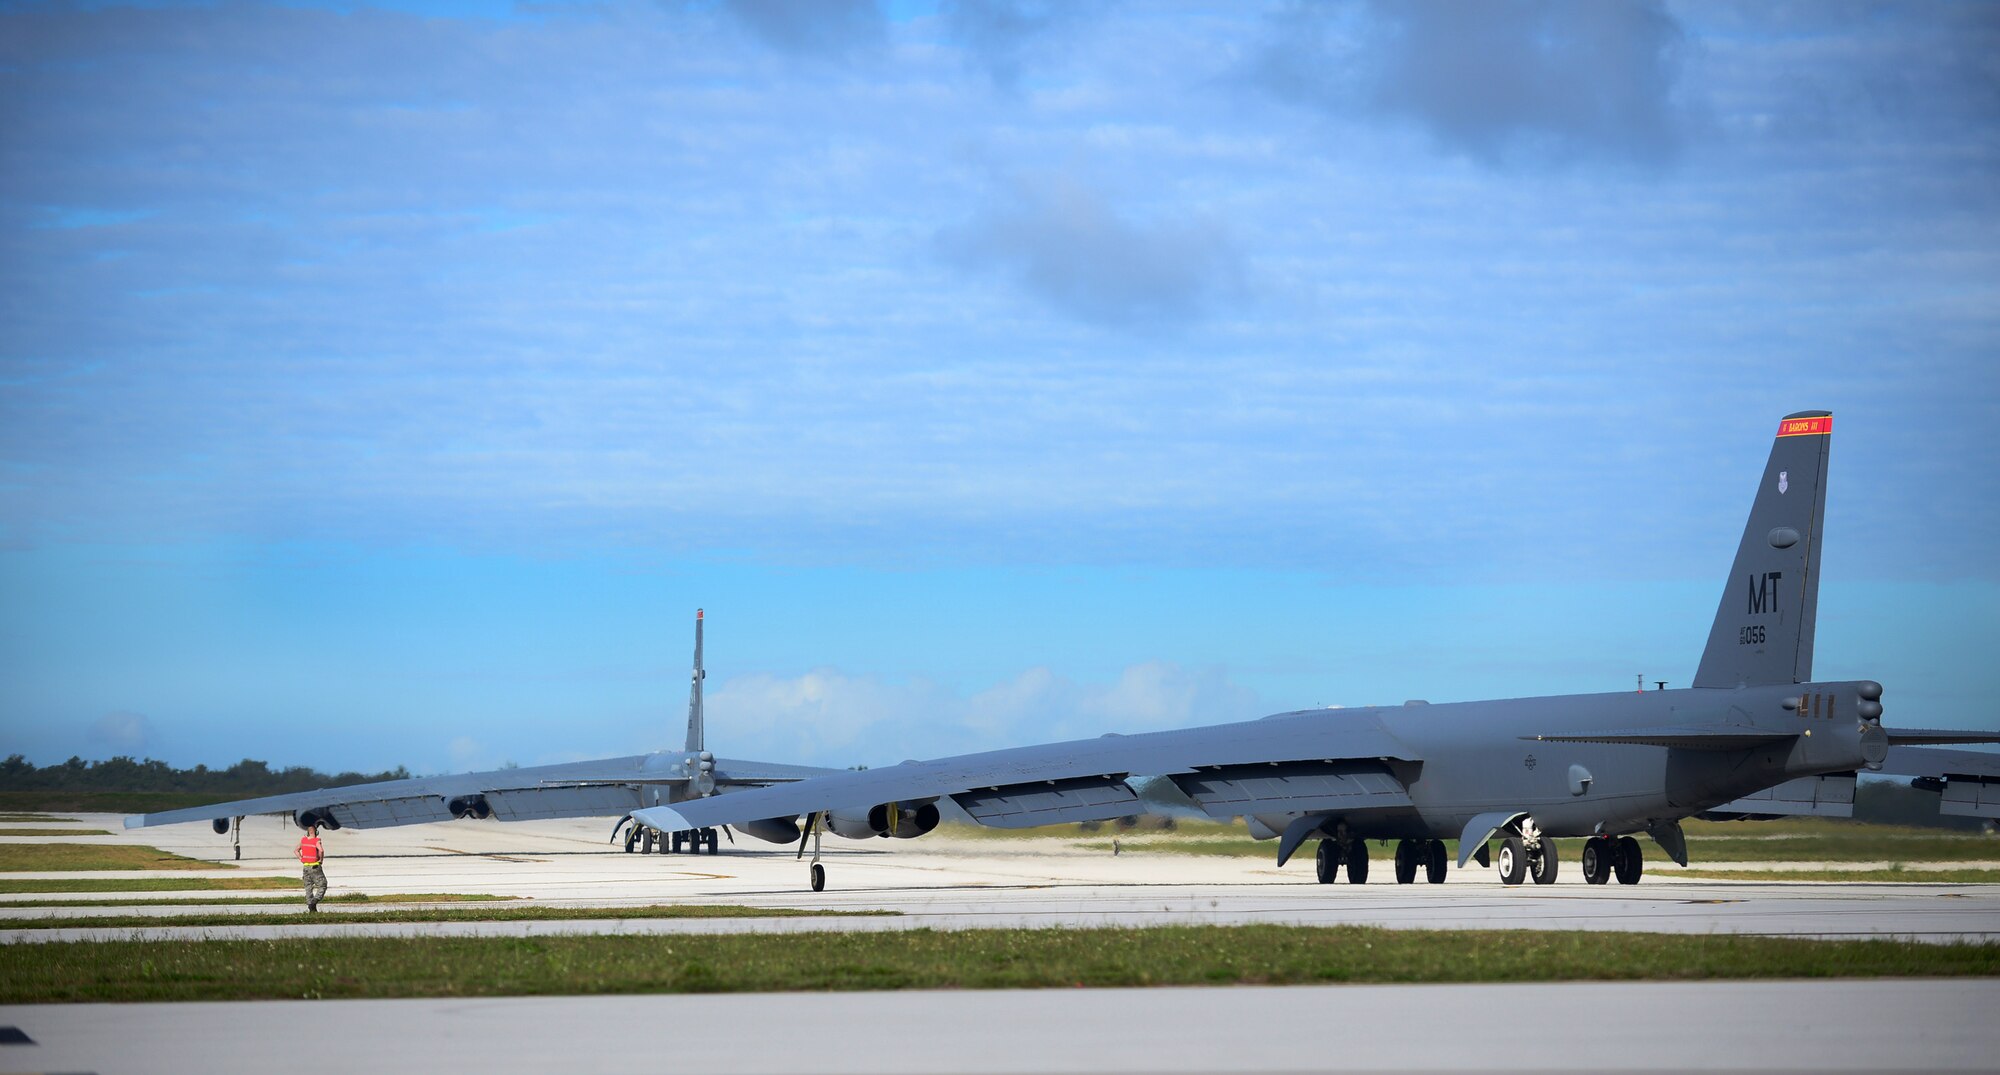 Two B-52 Stratofortresses taxi on the runway March 21, 2016, at Andersen Air Force Base, Guam. The U.S. military has maintained a deployed strategic bomber presence in the Pacific since March 2004, which has contributed significantly to regional security and stability. (U.S. Air Force photo by Senior Airman Joshua Smoot/Released)